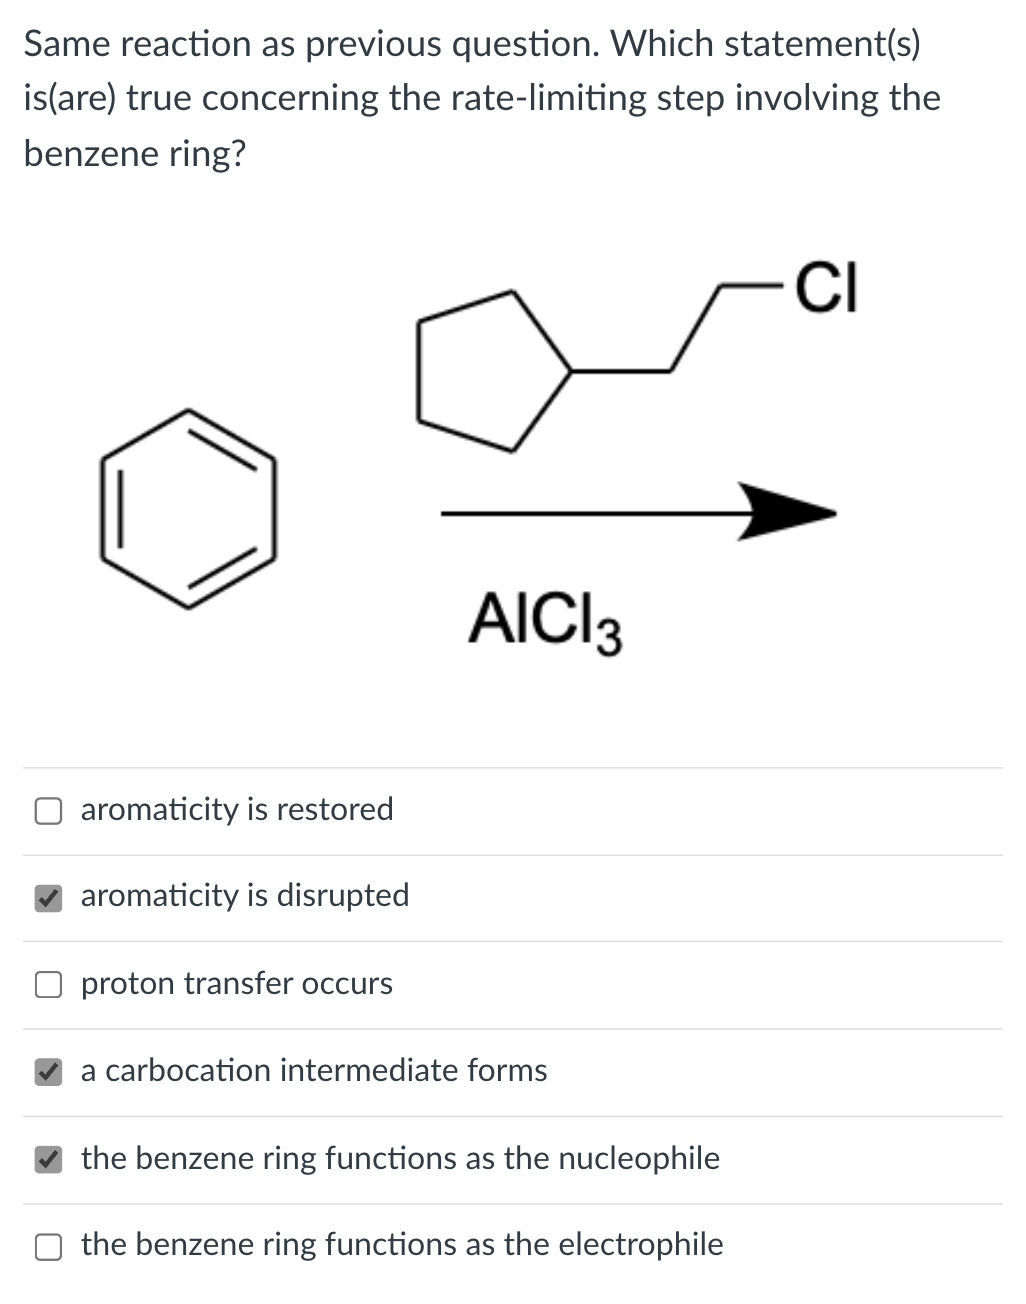 Same reaction as previous question. Which statement(s)
is(are) true concerning the rate-limiting step involving the
benzene ring?
CI
AICI3
aromaticity is restored
aromaticity is disrupted
proton transfer occurs
a carbocation intermediate forms
the benzene ring functions as the nucleophile
the benzene ring functions as the electrophile
